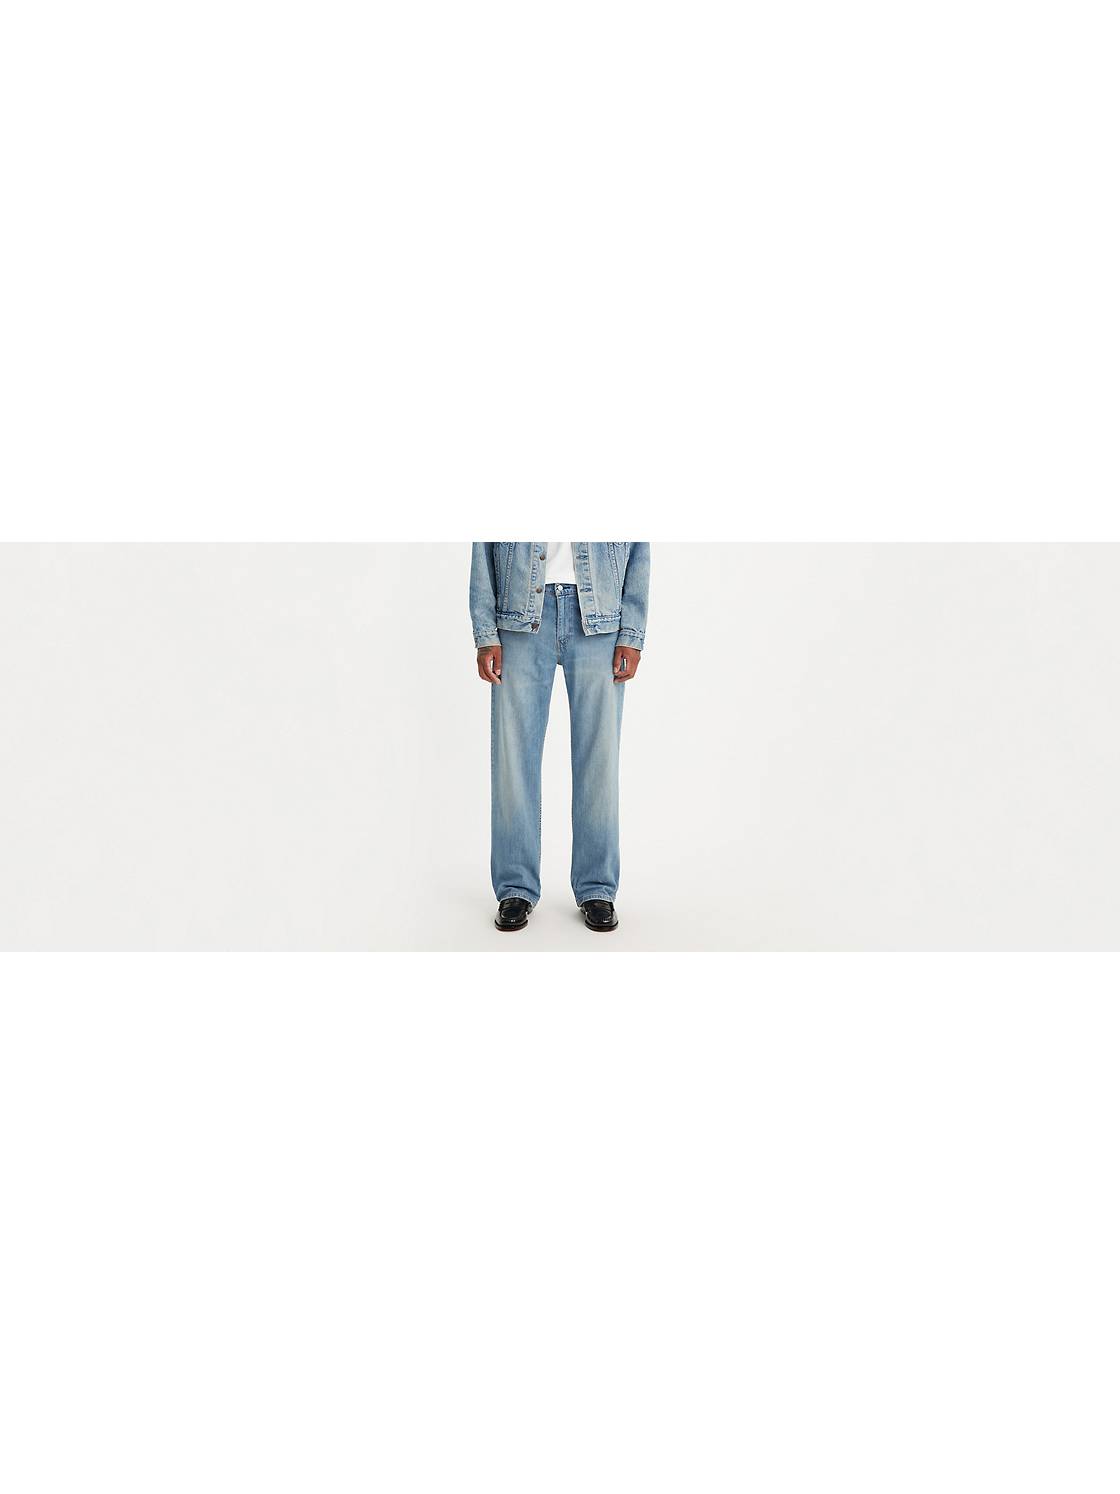 Baggy Jeans Available @ Best Price Online